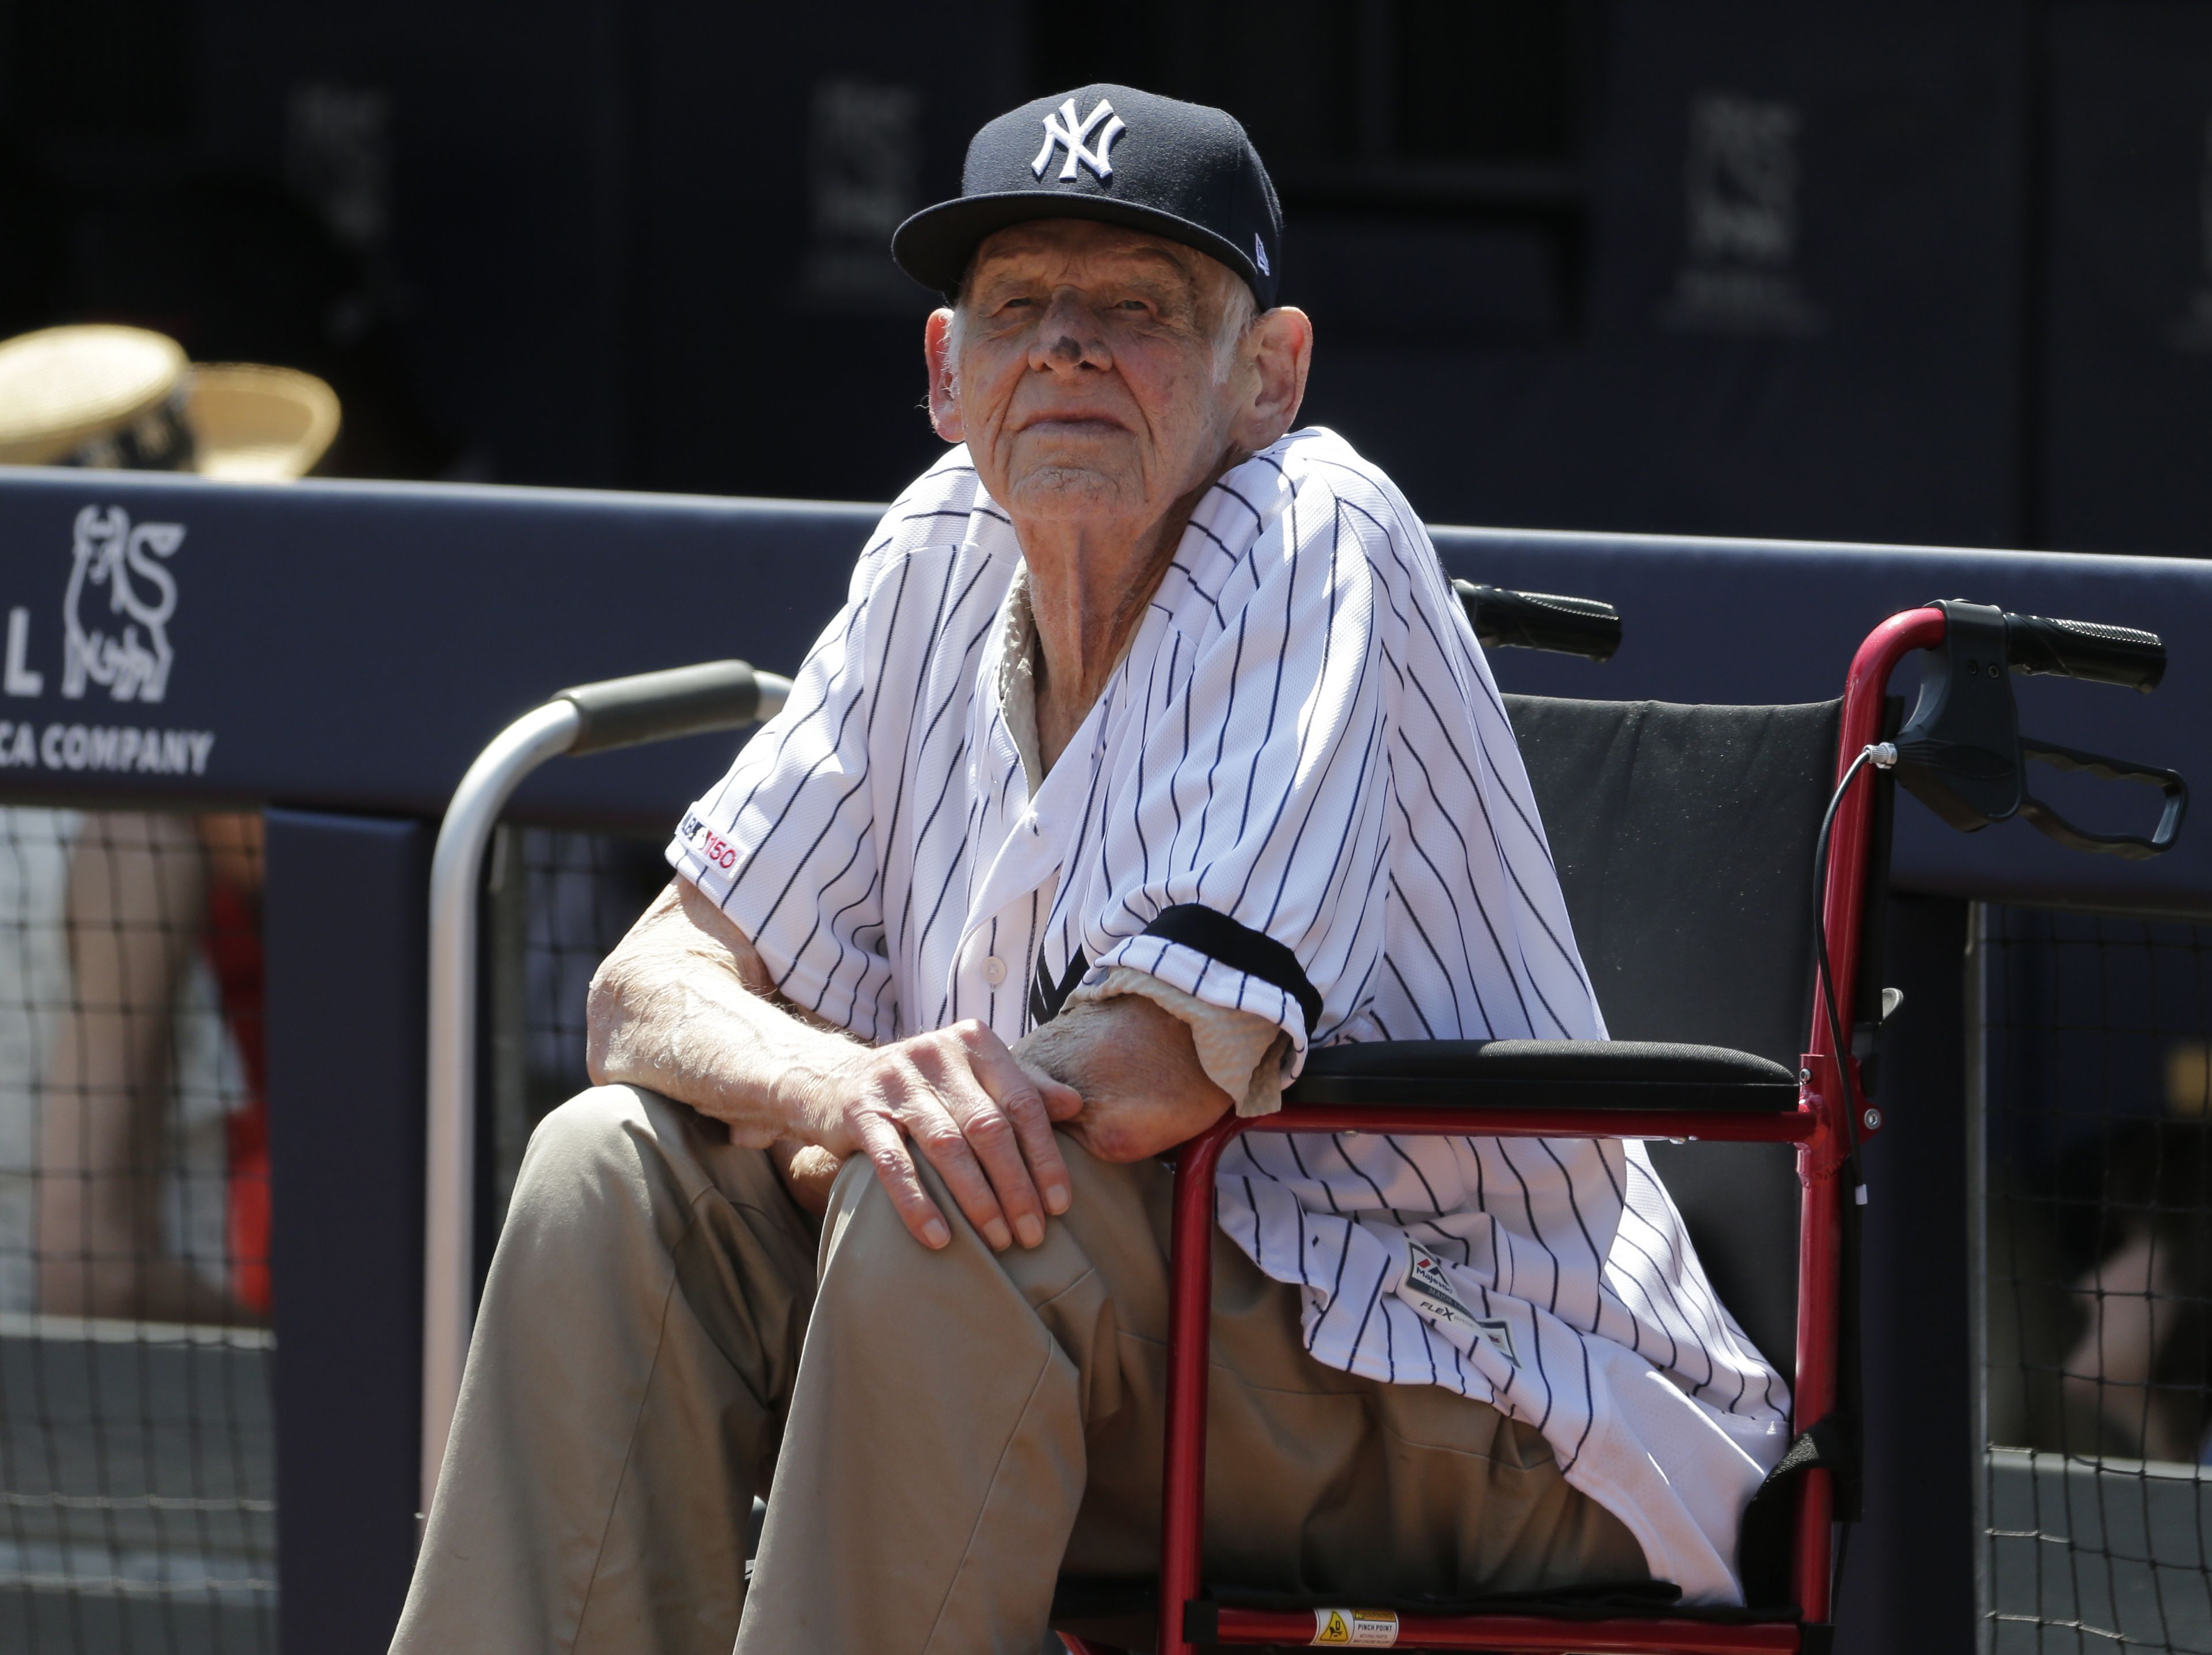 Don Larsen, who threw only perfect game in World Series history, dies at 90